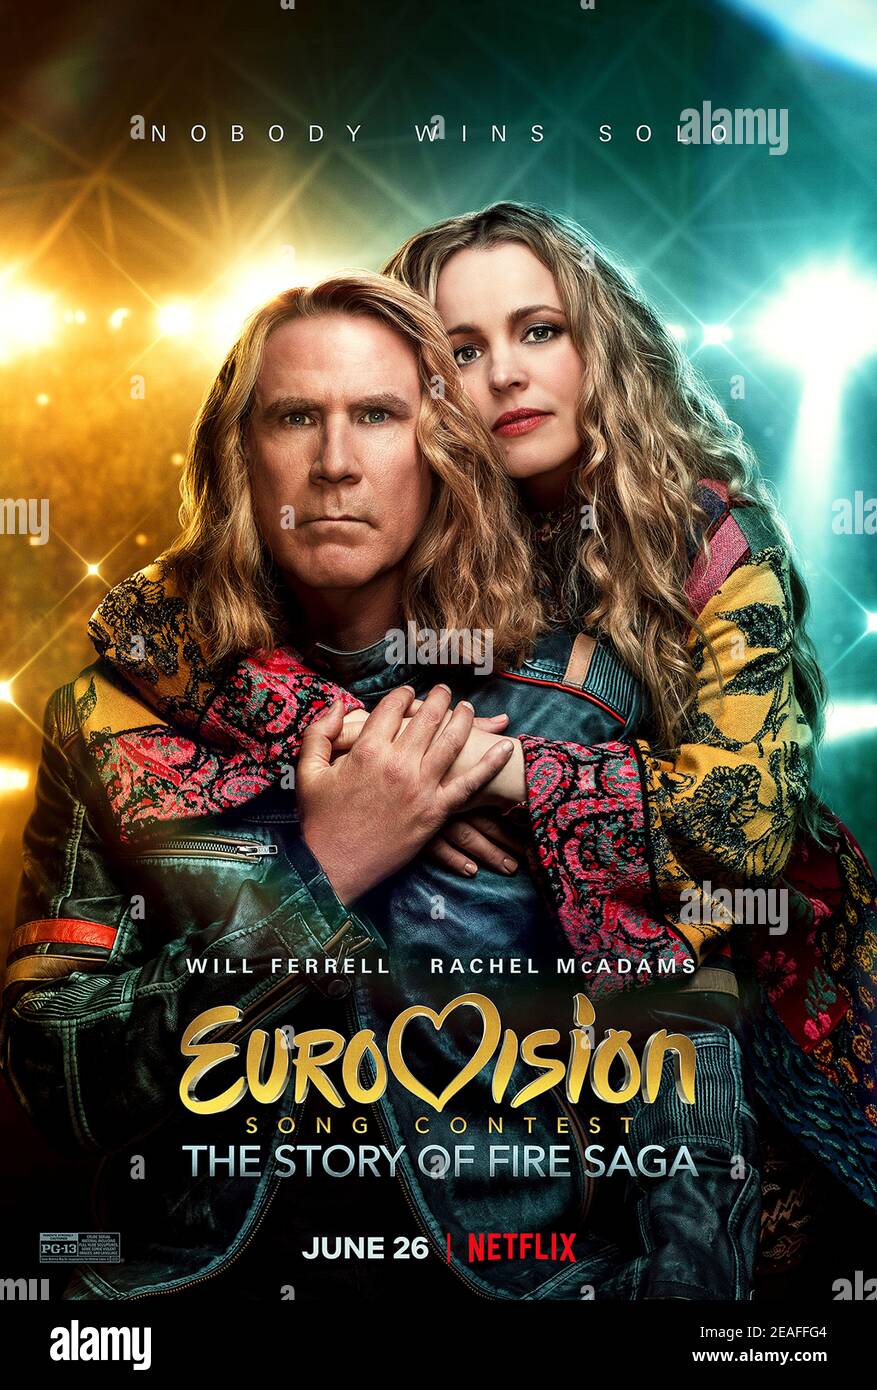 Eurovision Song Contest: The Story of Fire Saga (2020) directed by David Dobkin and starring Will Ferrell, Rachel McAdams and Dan Stevens. Aspiring musicians Lars and Sigrit are given the opportunity to represent Iceland at the Eurovision Song Contest. Stock Photo